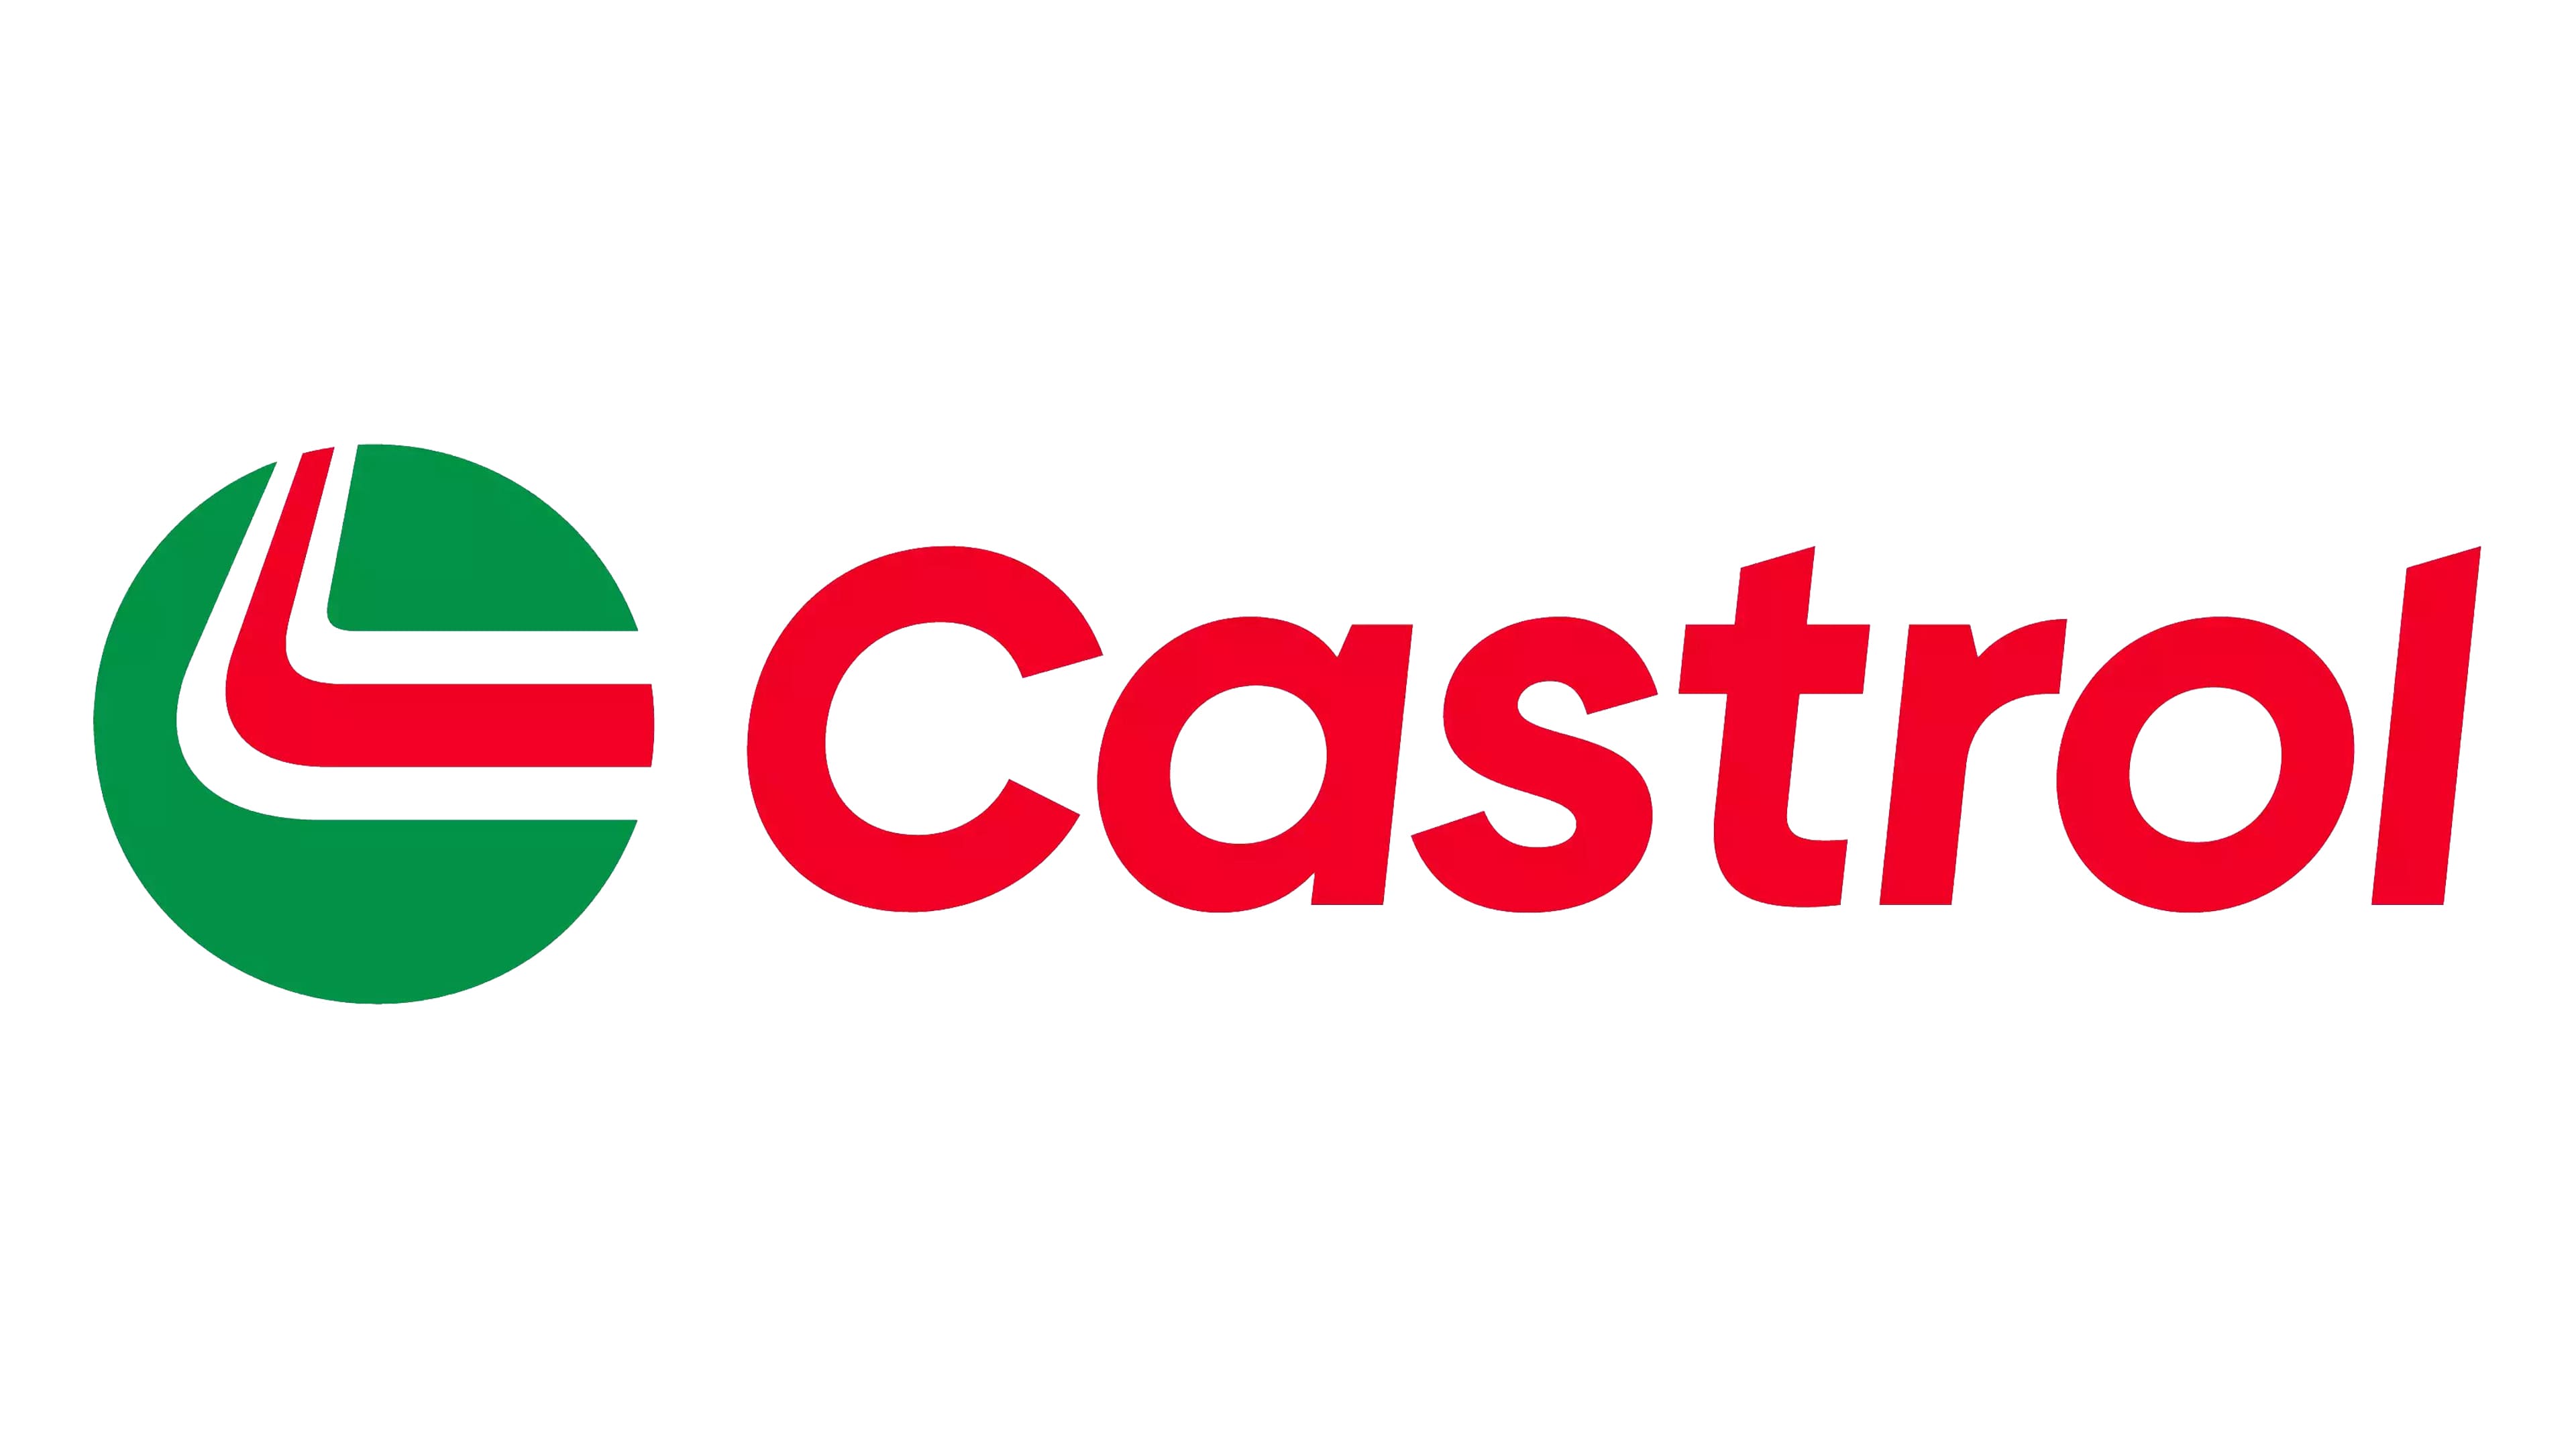 Castrol logo and symbol, meaning, history, PNG